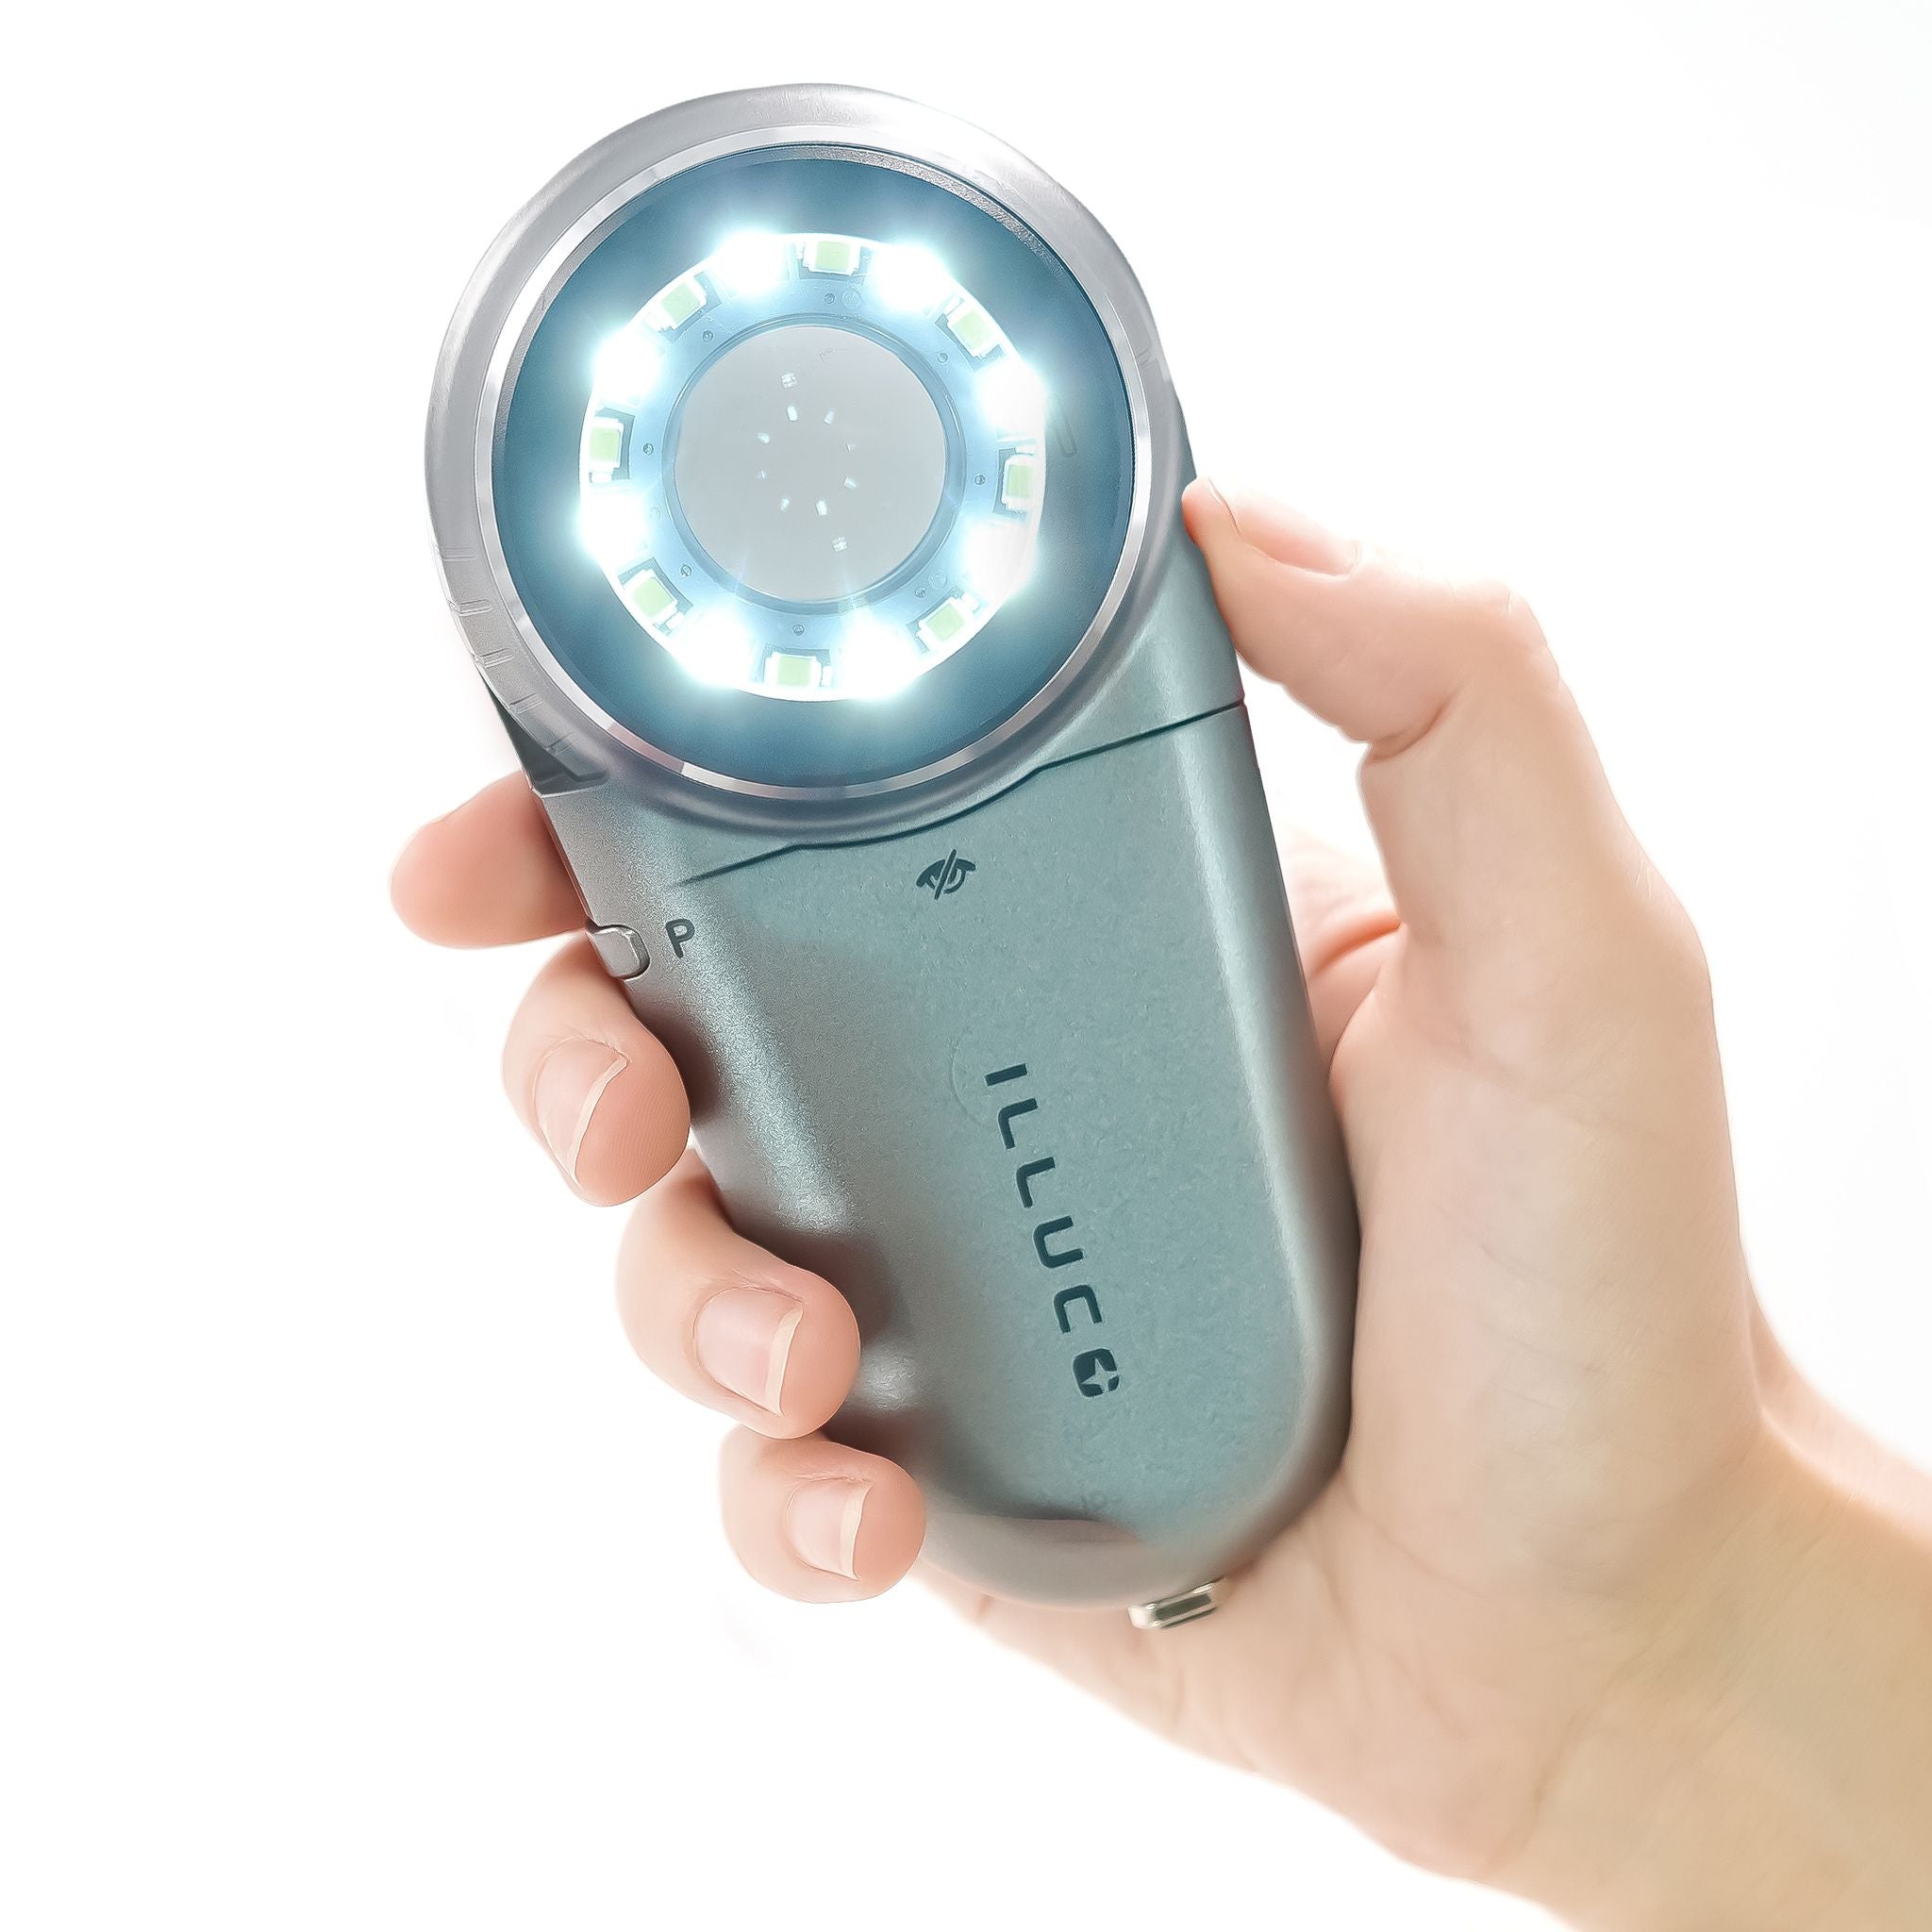 IDS-1100C Dermatoscope in hand with light on from the front view